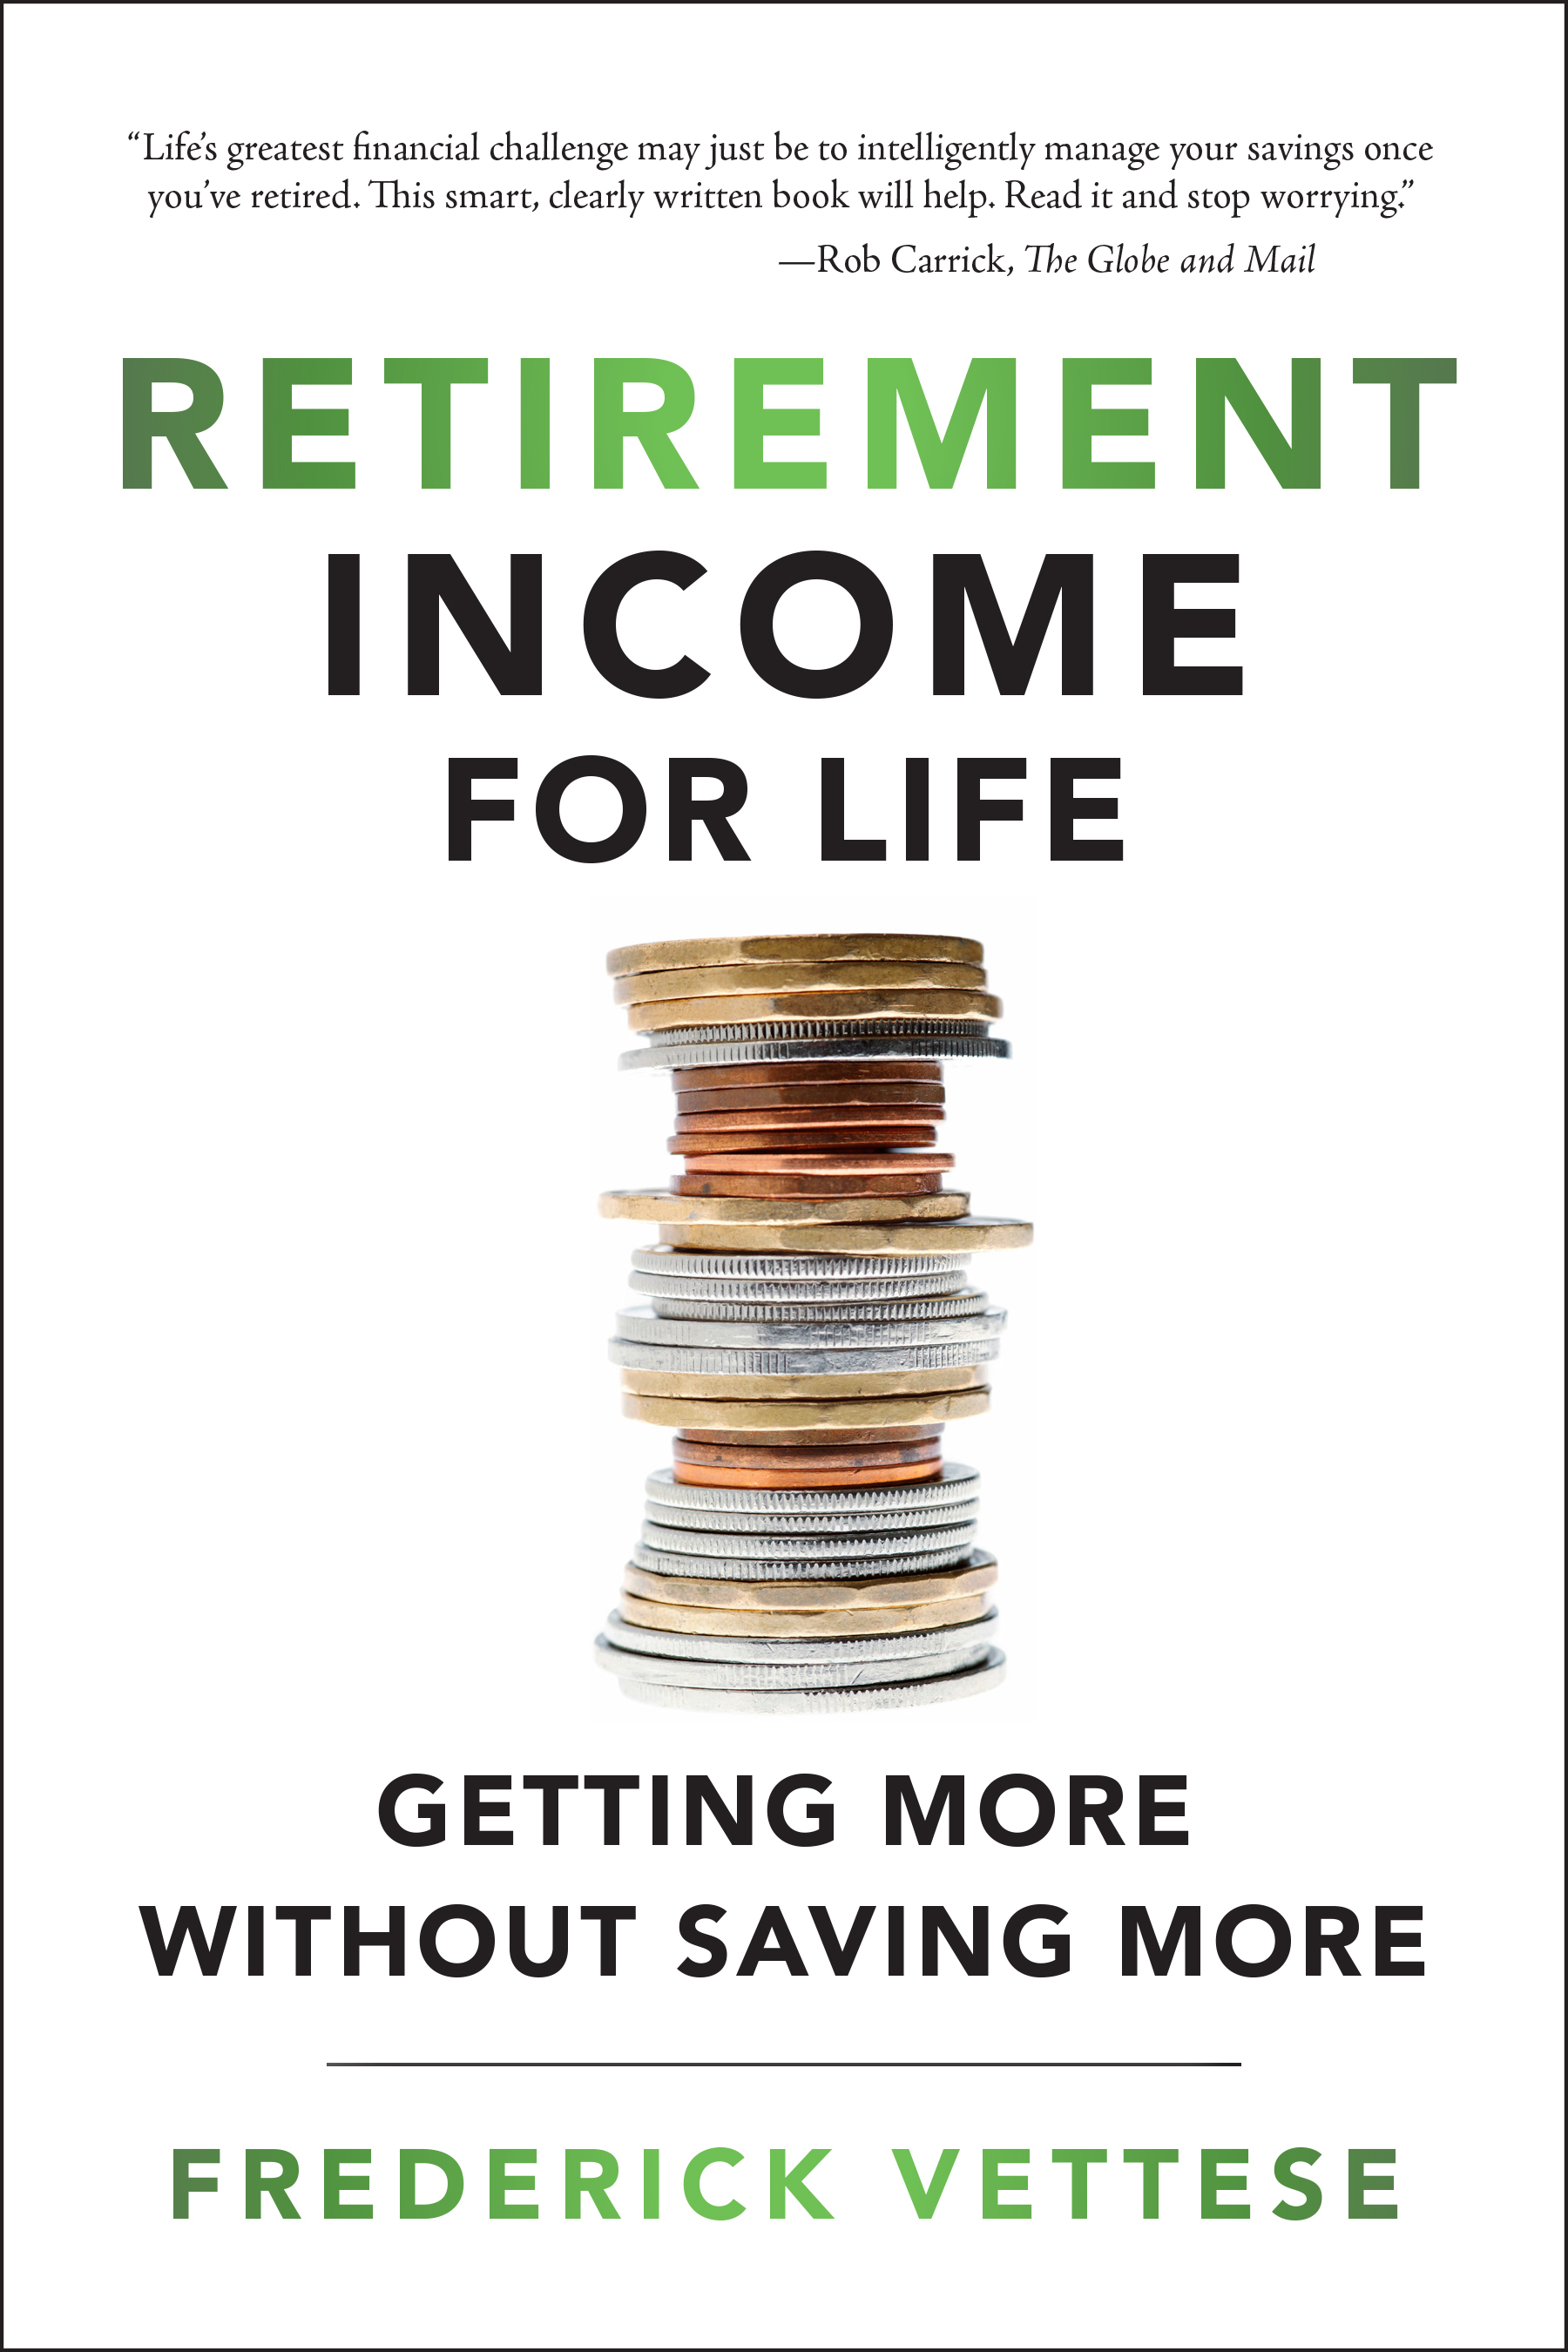 Retired Money: How to boost Retirement Income with Fred Vettese’s 5